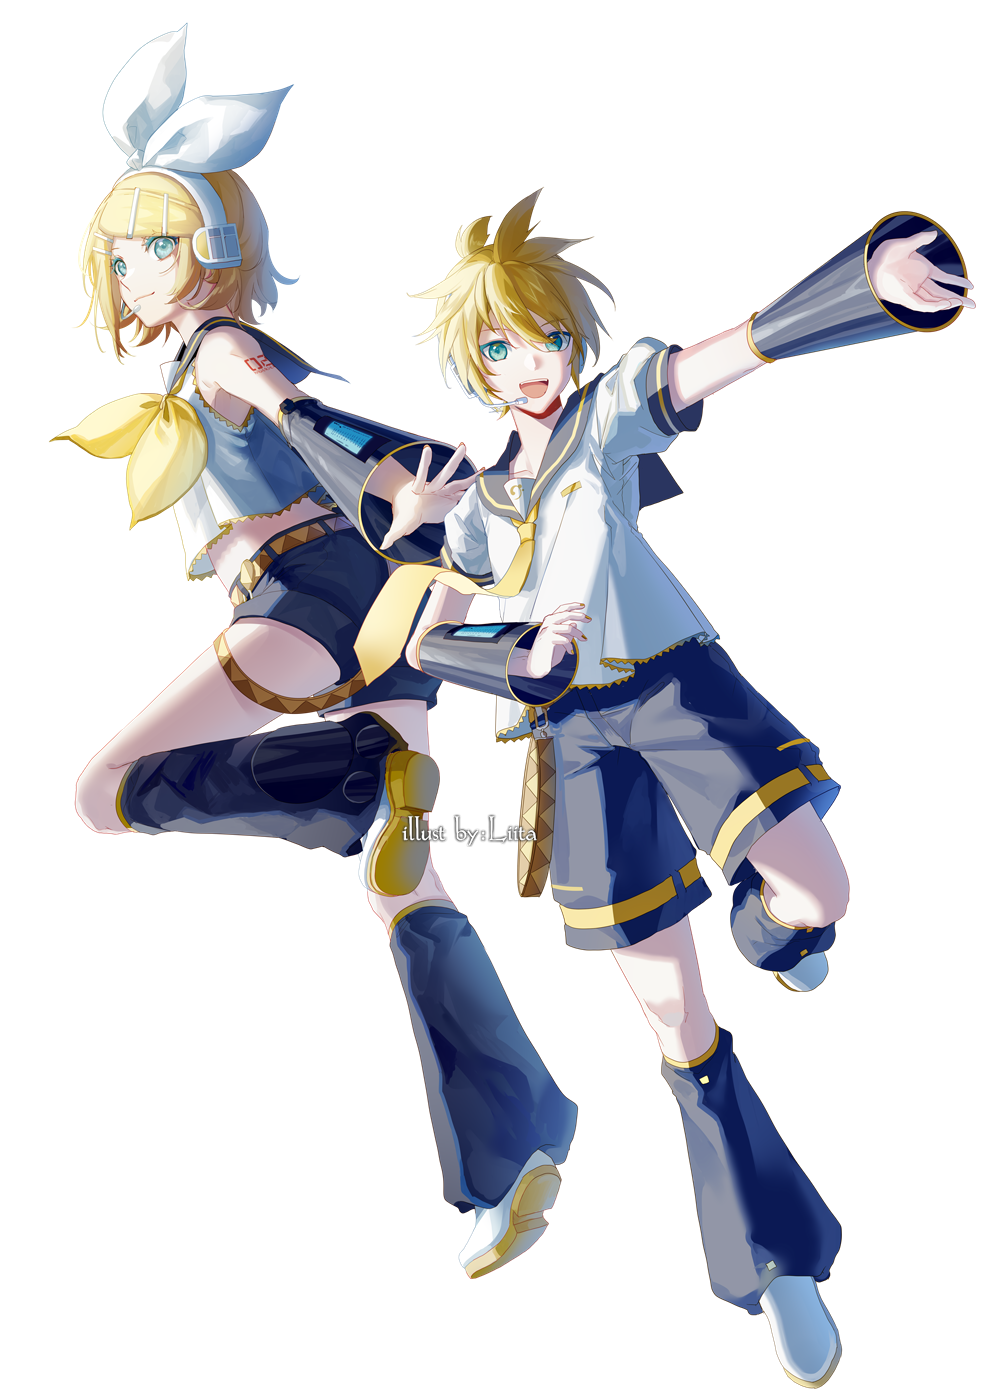 1boy 1girl arm_warmers artist_name bangs bare_shoulders bass_clef belt black_collar black_shorts black_sleeves blonde_hair blue_eyes bow collar commentary crop_top detached_sleeves full_body hair_bow hair_ornament hairclip headphones headset highres kagamine_len kagamine_rin leg_up leg_warmers looking_at_viewer nail_polish neckerchief necktie open_mouth outstretched_arm outstretched_hand sailor_collar school_uniform shirt short_hair short_ponytail short_shorts short_sleeves shorts shoulder_tattoo sleeveless sleeveless_shirt smile spiky_hair swept_bangs tattoo vocaloid white_background white_bow white_shirt yamiluna39 yellow_nails yellow_neckwear